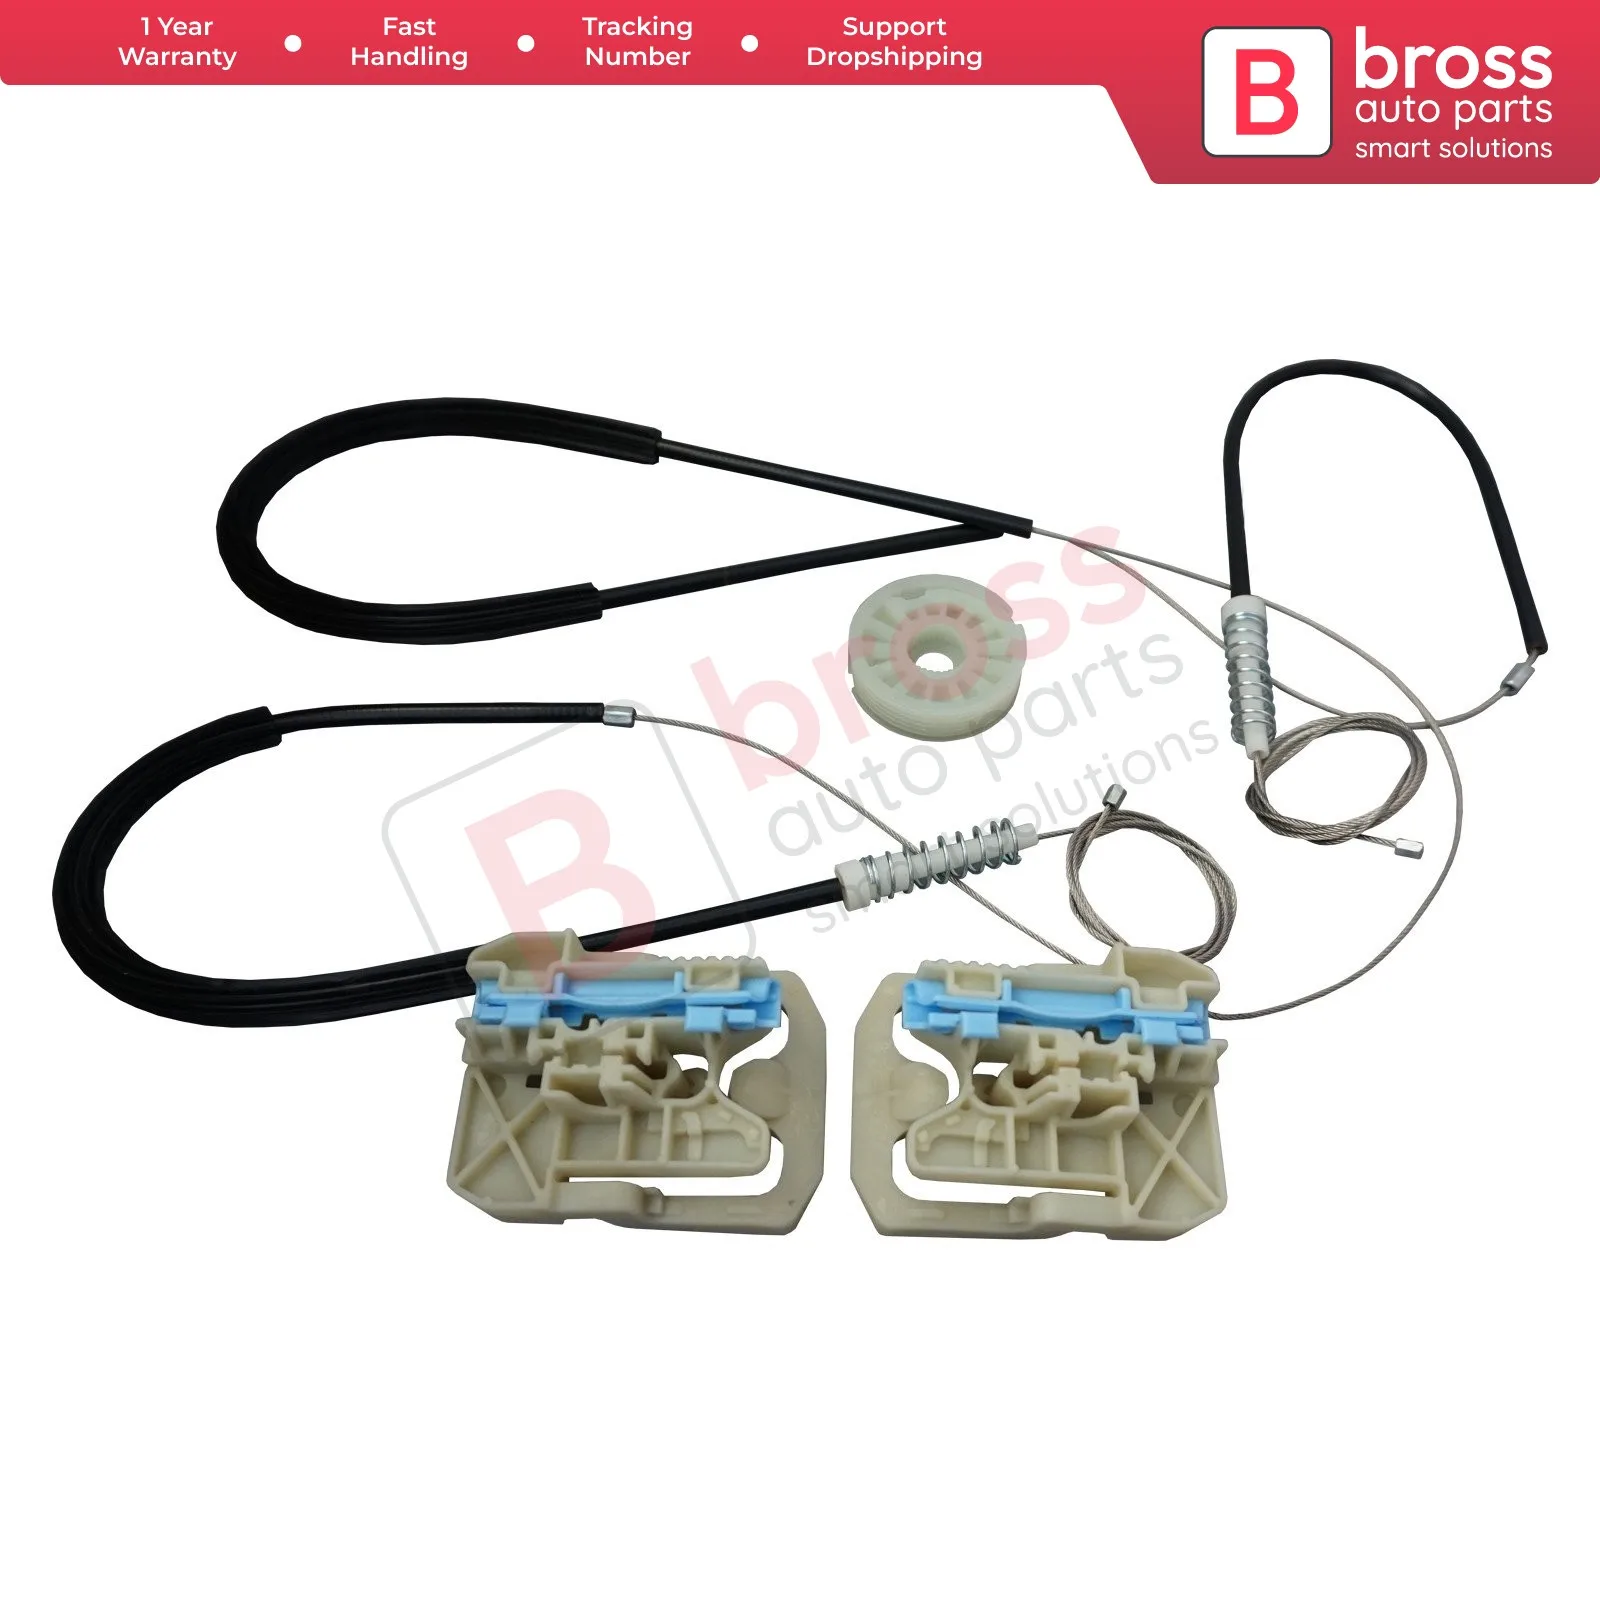 BWR5169 Window Regulator Set Repair Front Right Door 8 K0837462 for A4 Base 2009-2011; A4 Quattro 2009-2011; s4 Base 2009-2011